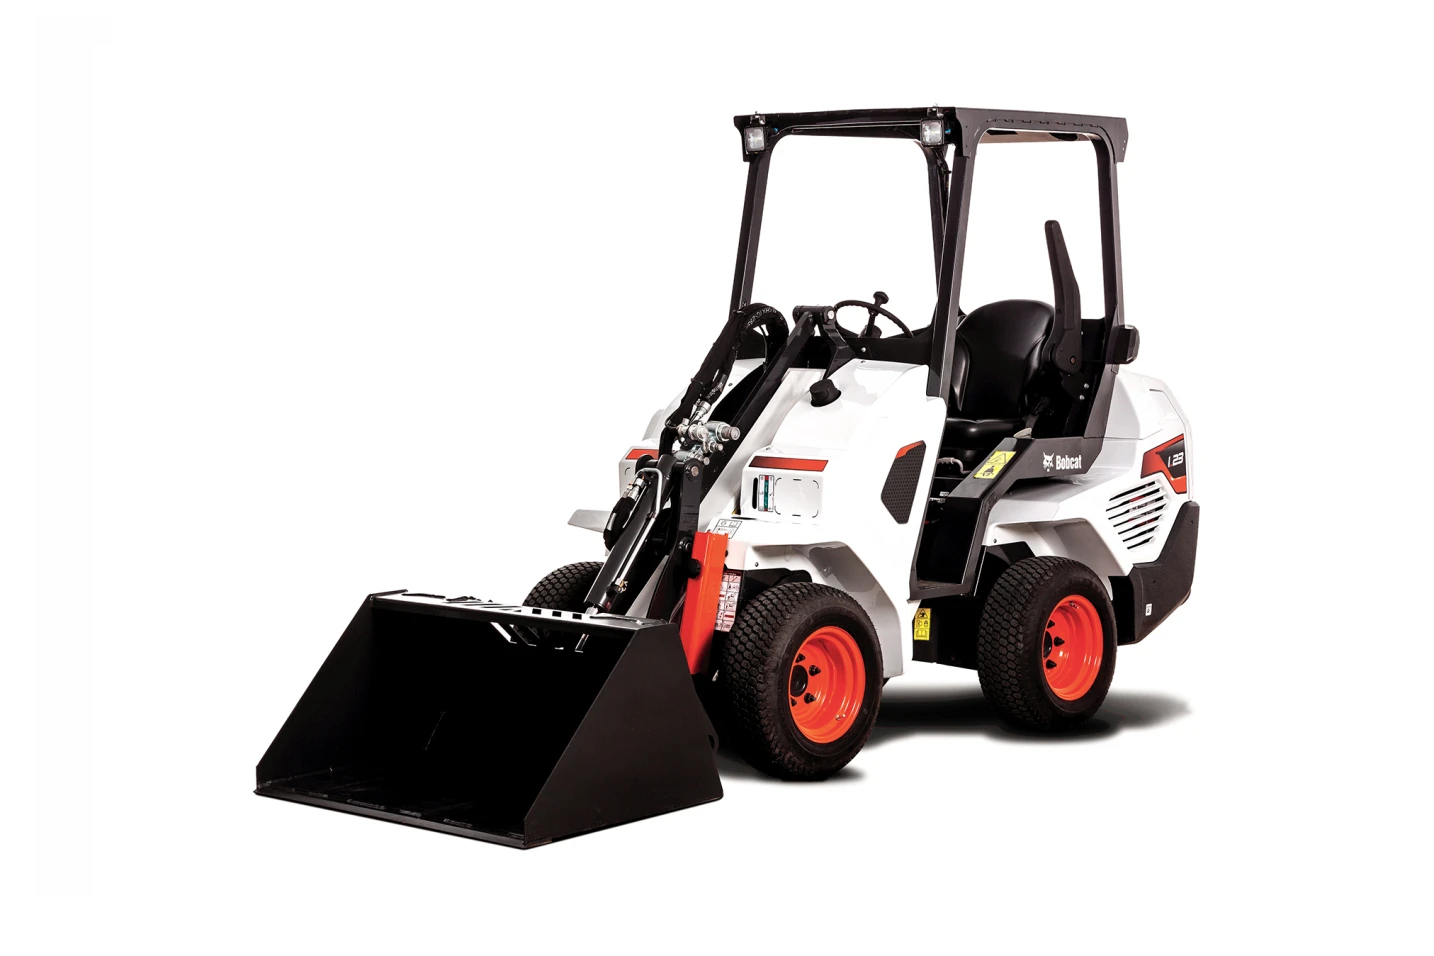 Browse Specs and more for the Bobcat L23 Small Articulated Loader - Bobcat of North Texas